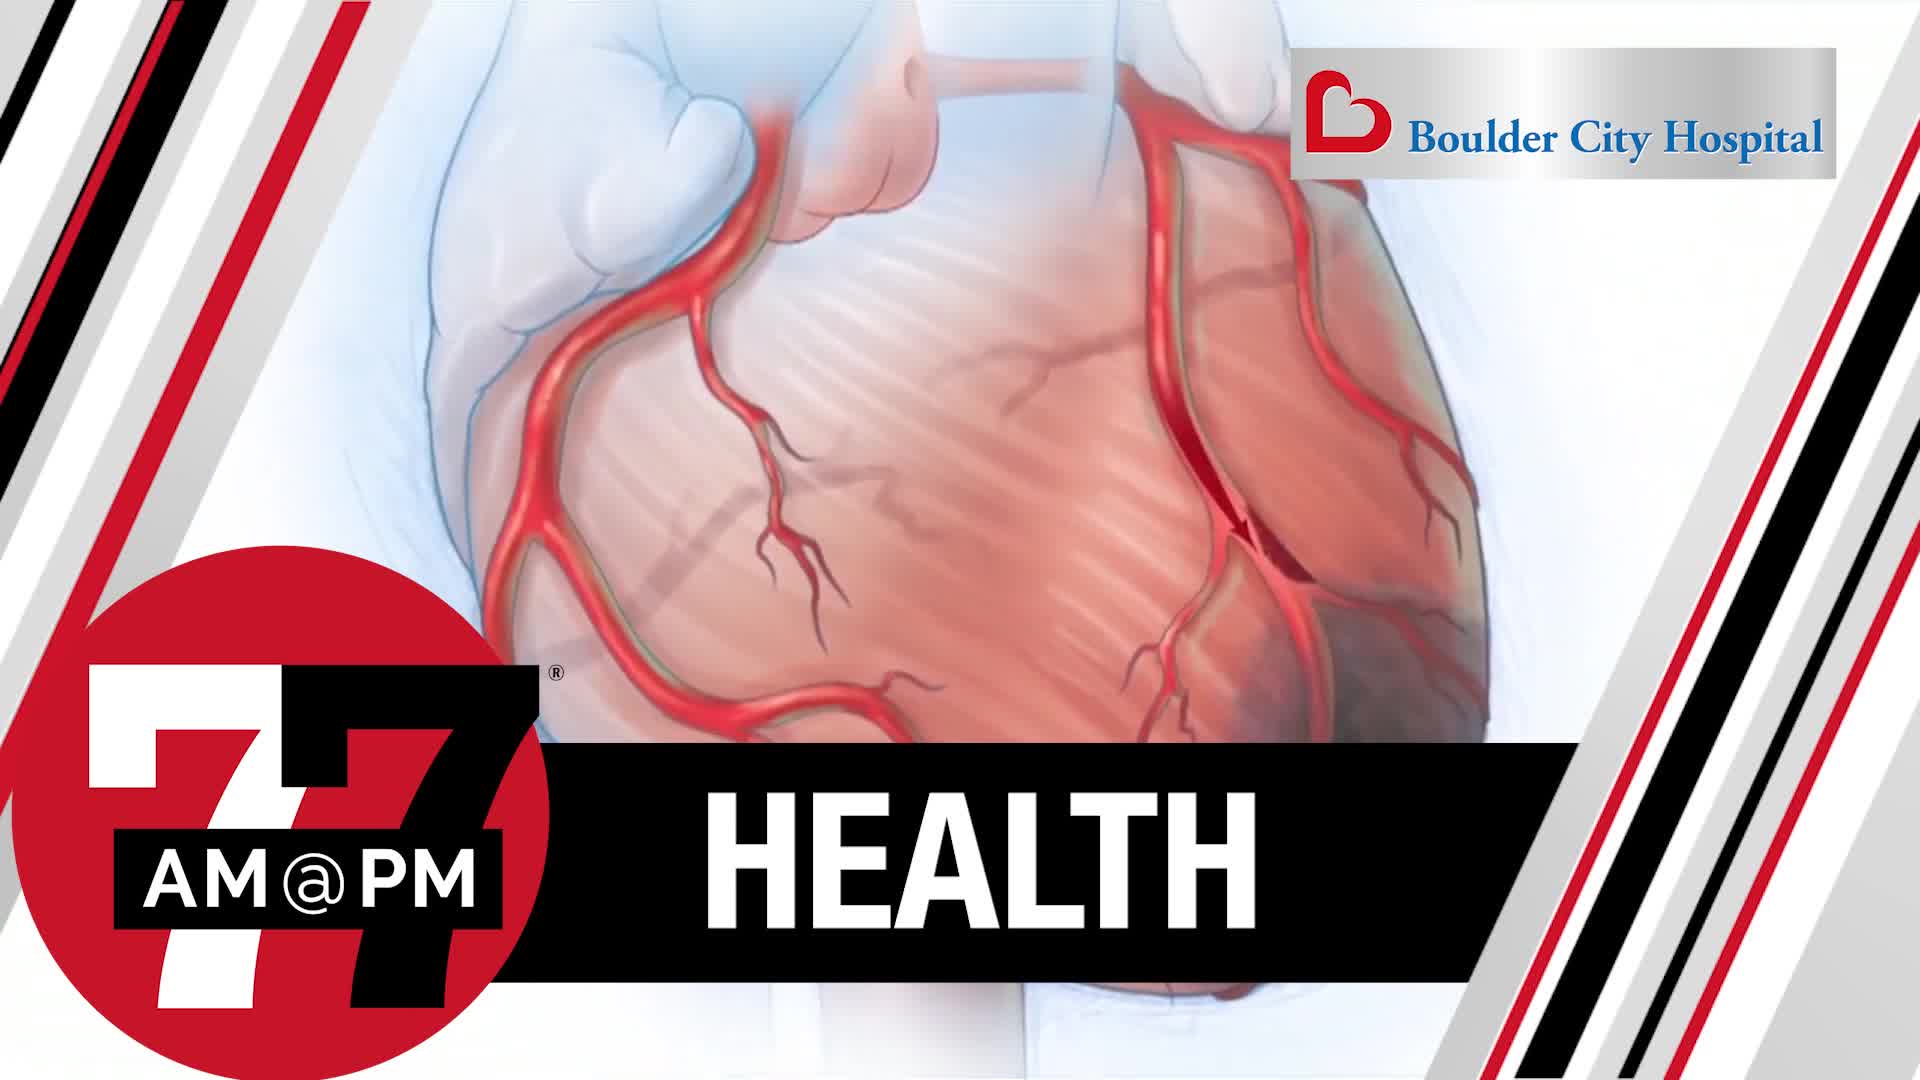 Coronary artery disease most common heart condition in the U.S.